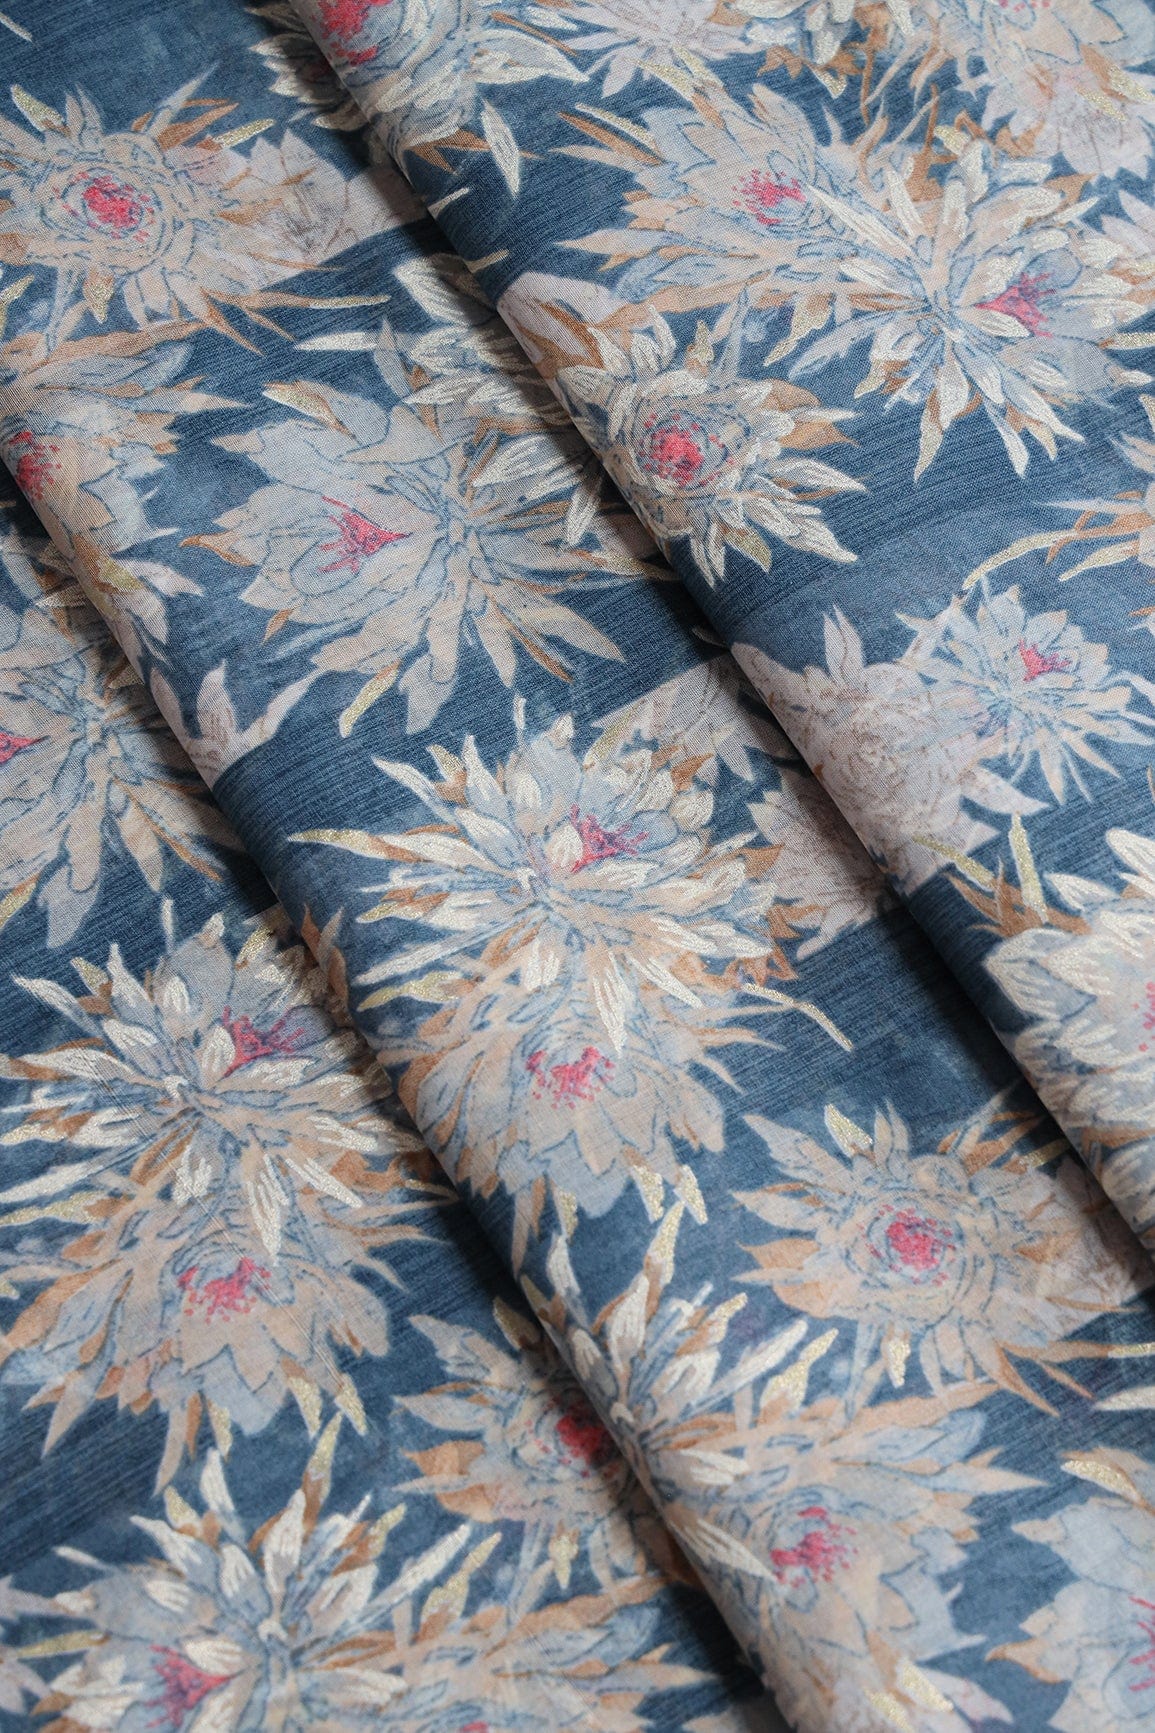 doeraa Prints Grey And White Floral Foil Print On Blue Pure Mul Cotton Fabric